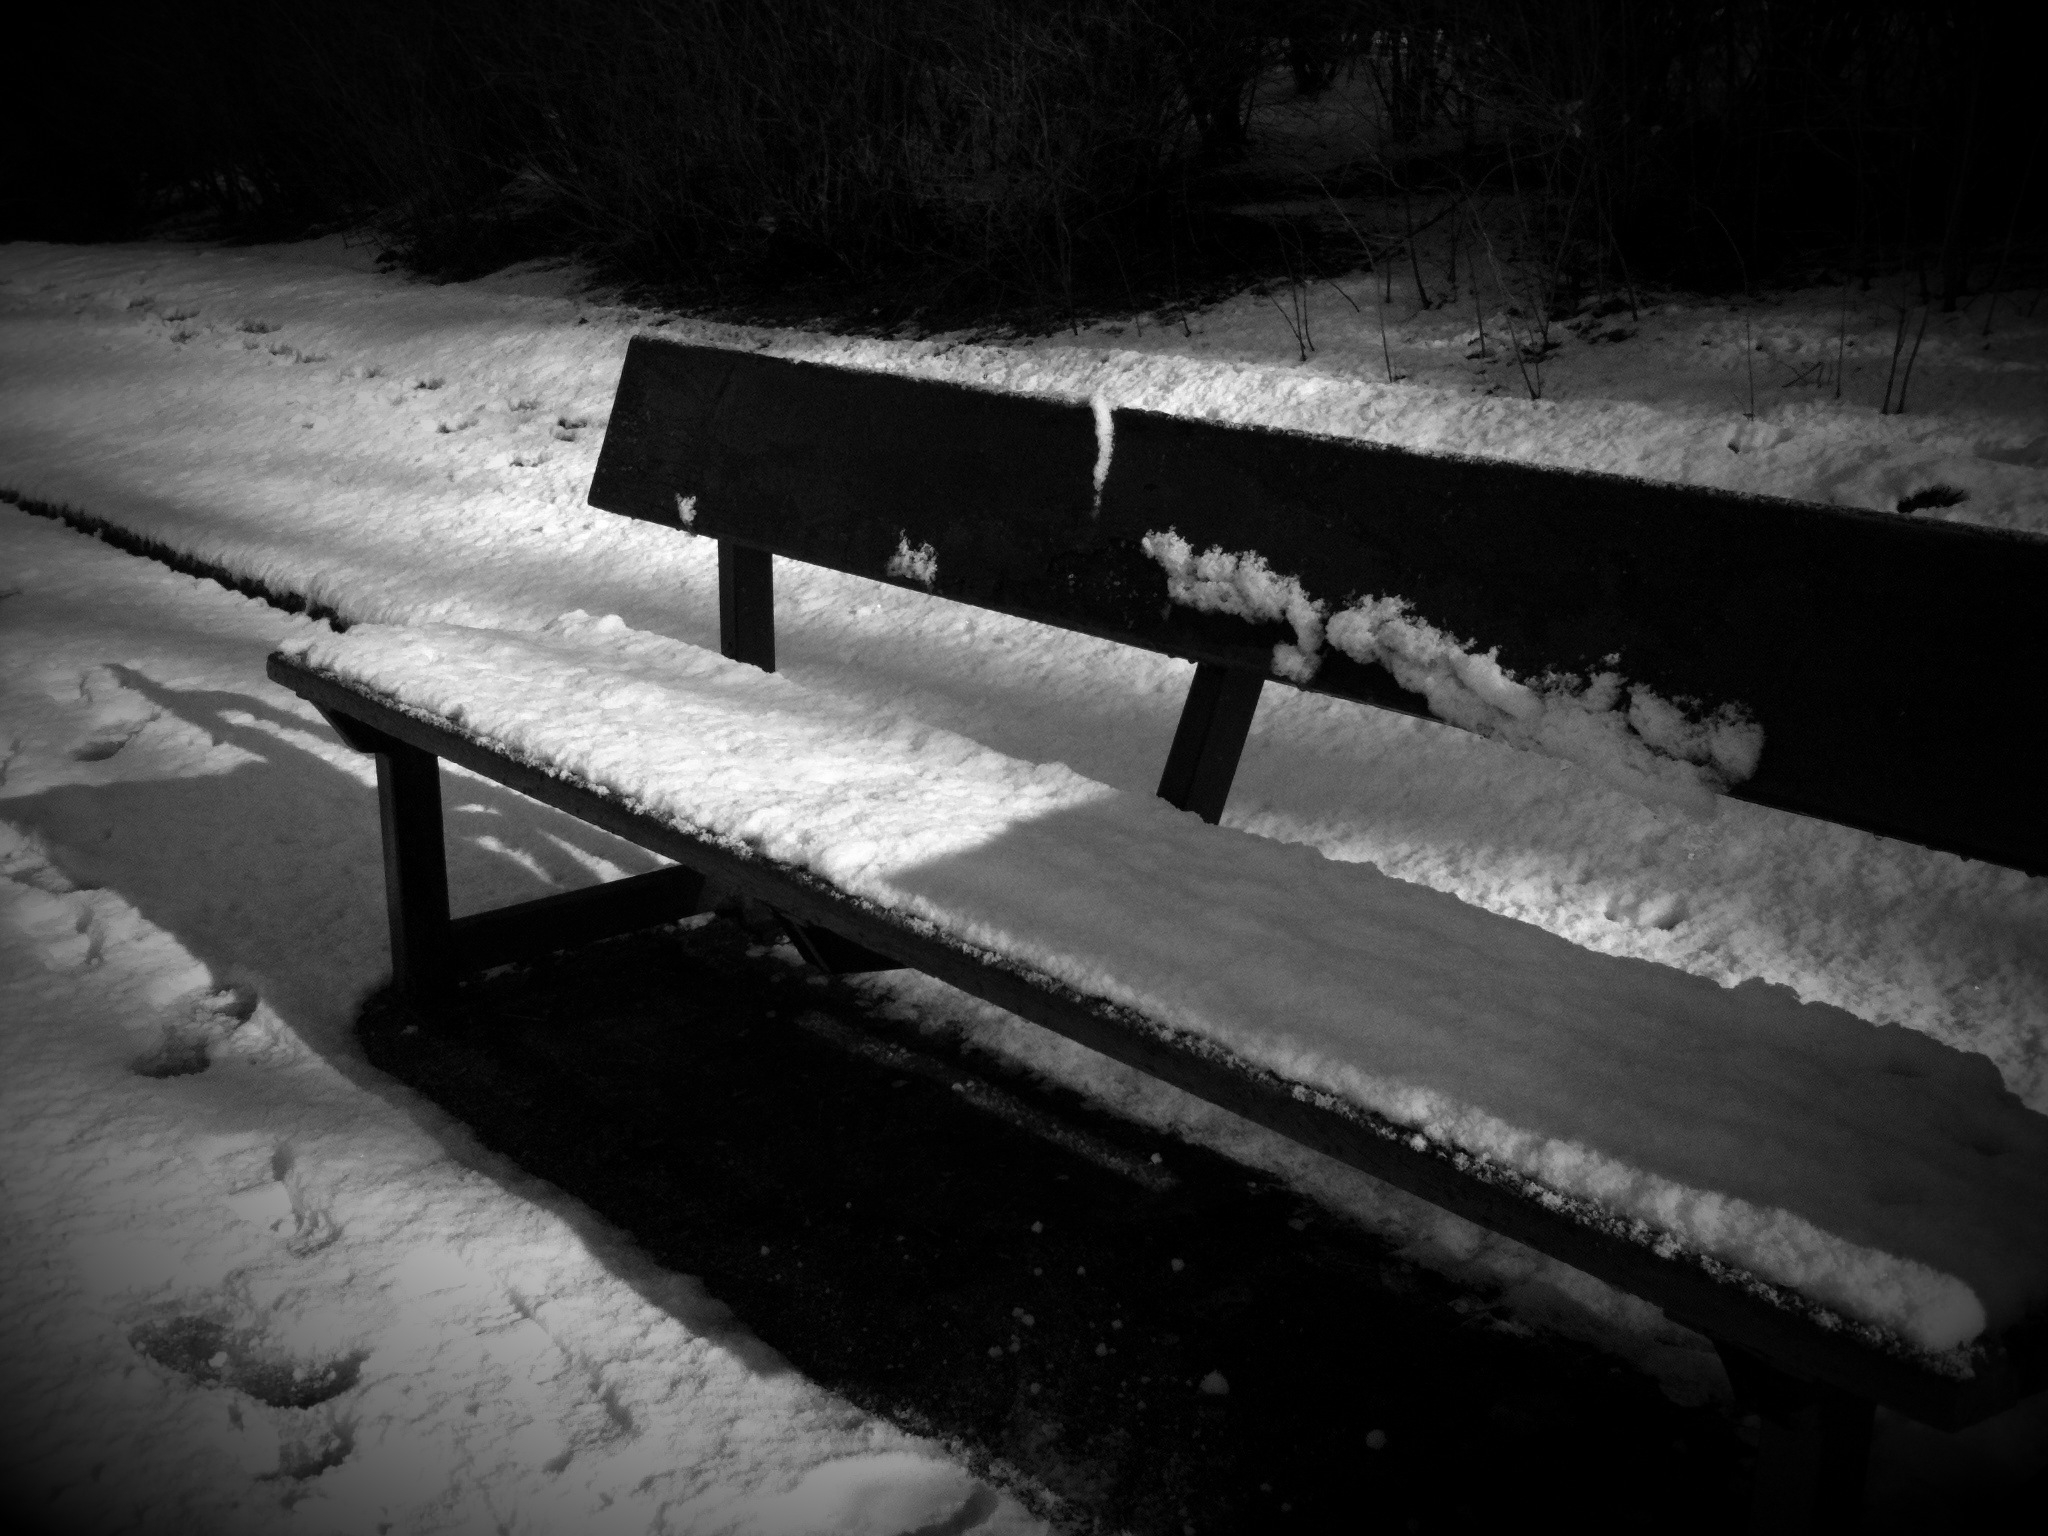 Photograph: Bench And Snow